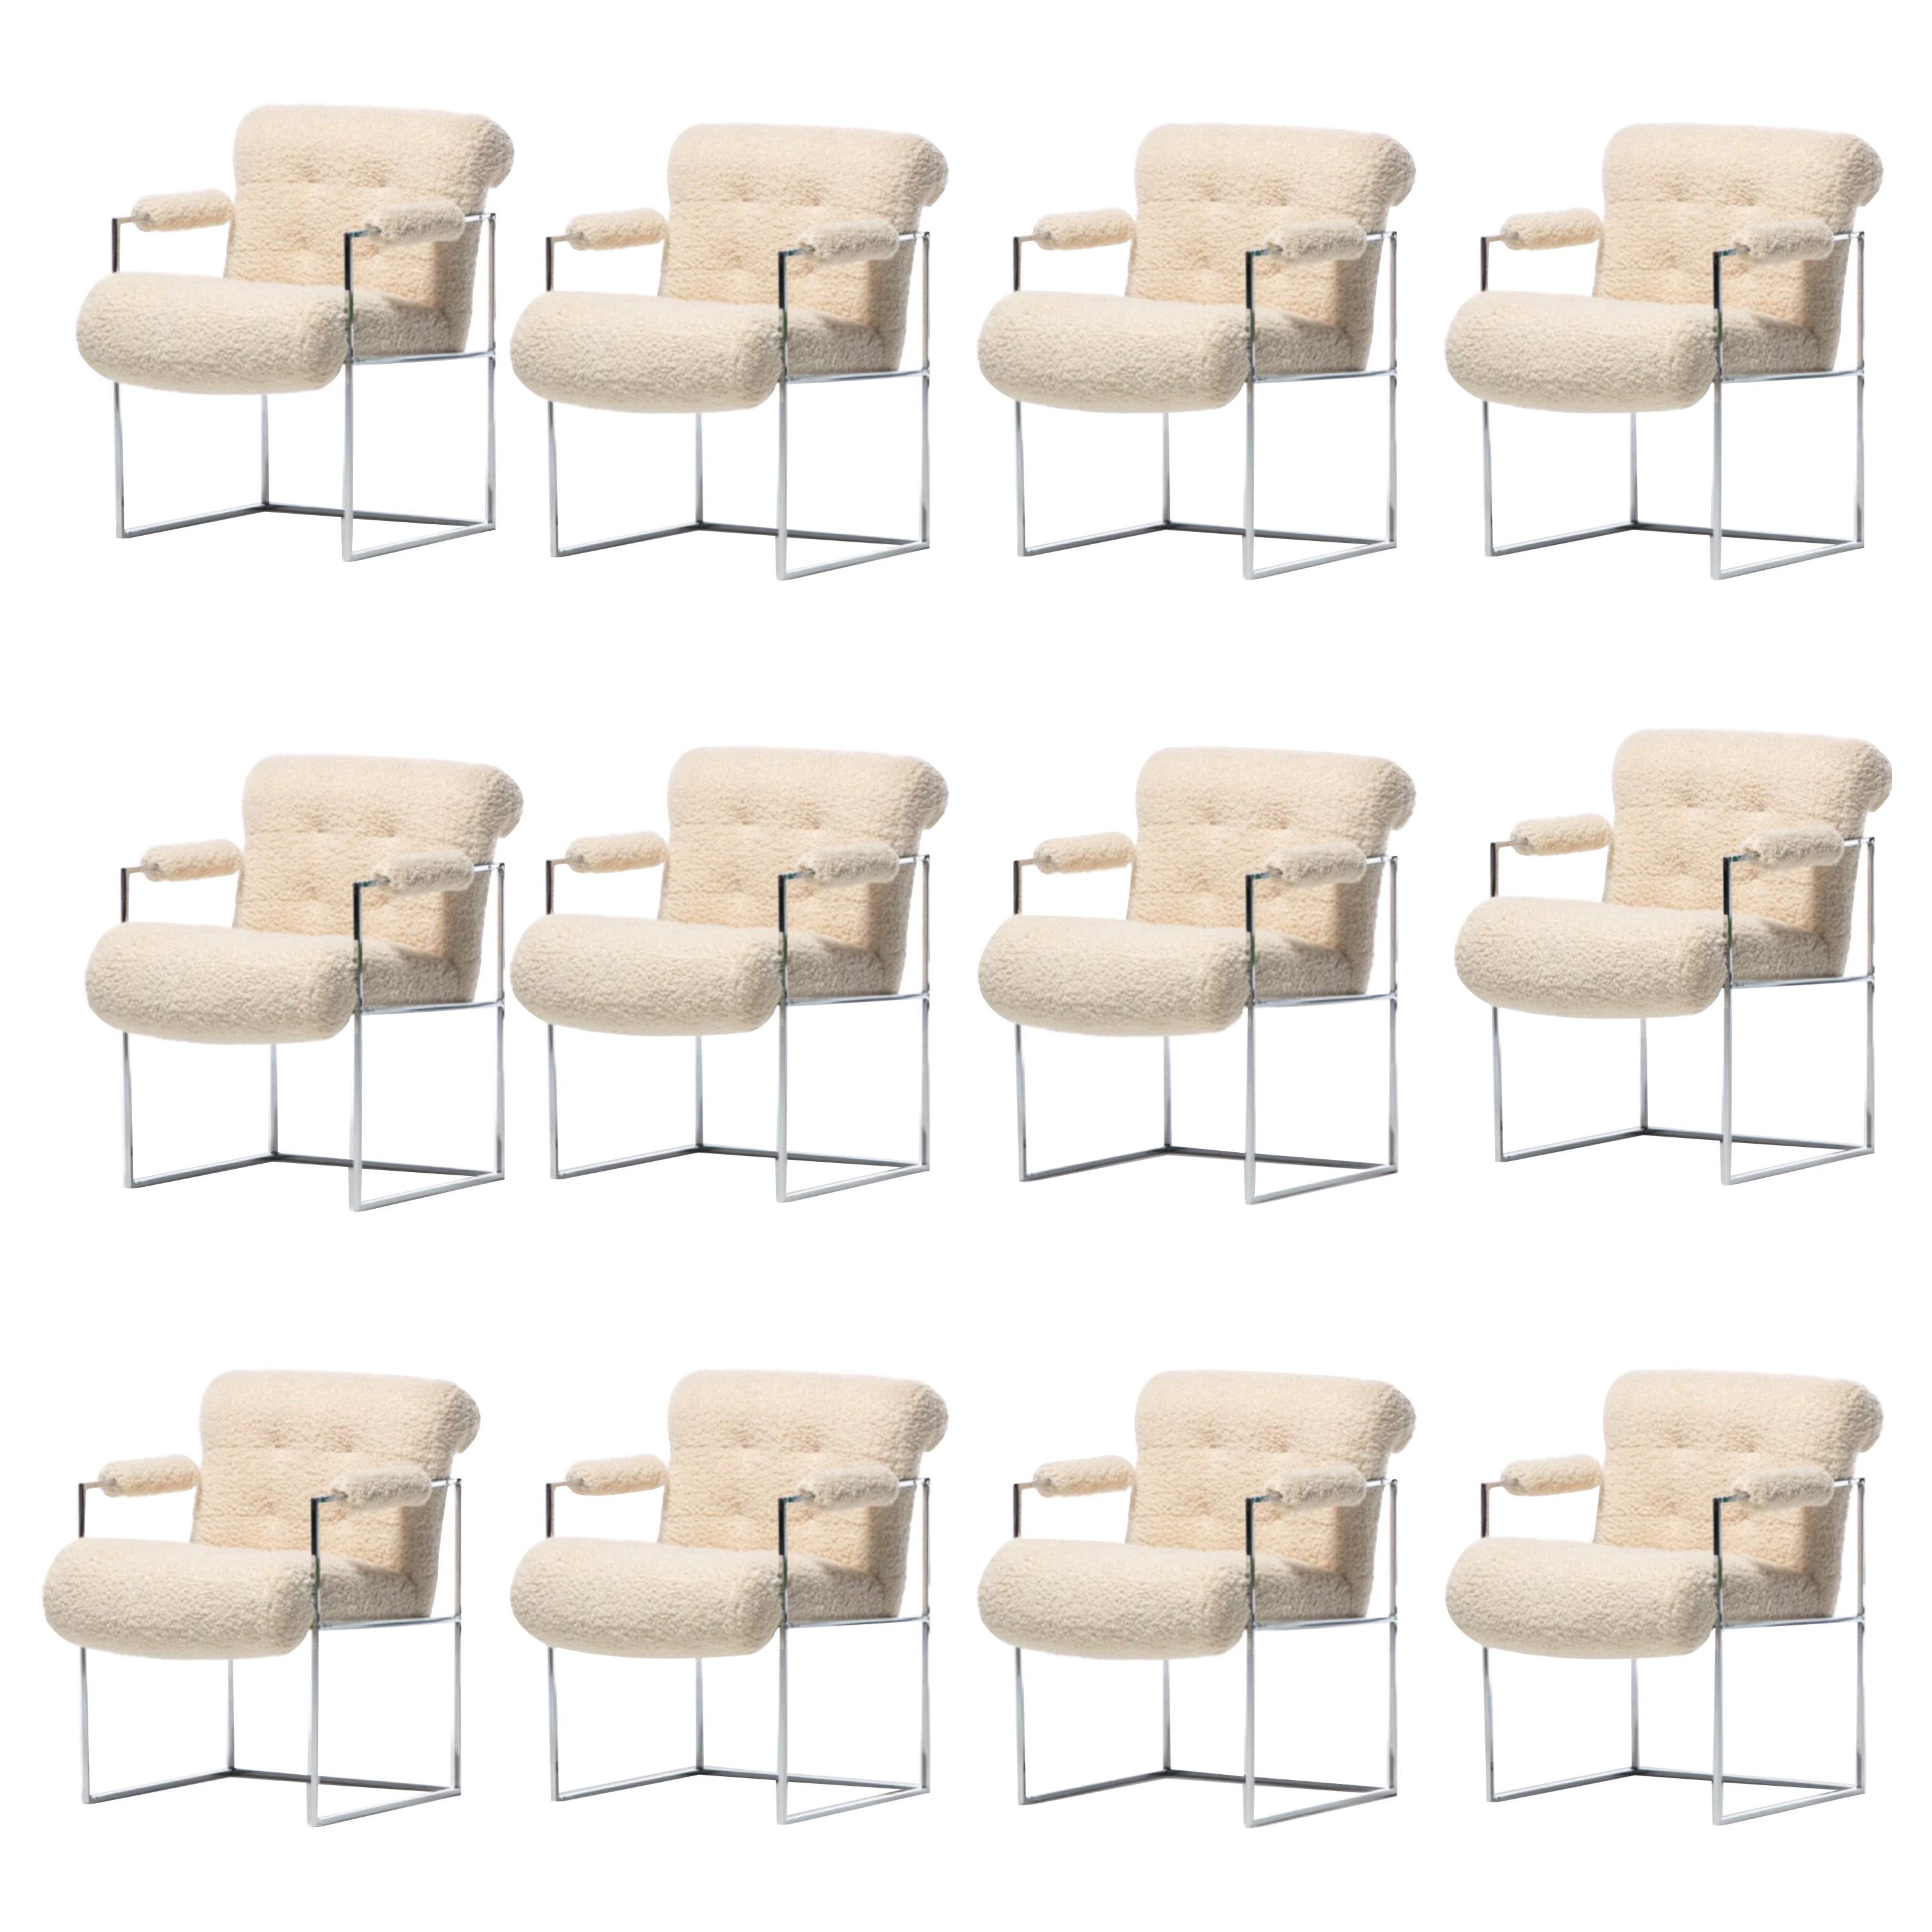 Milo Baughman Set of 12 Chrome Dining Chairs in Ivory Bouclé, circa 1975 For Sale